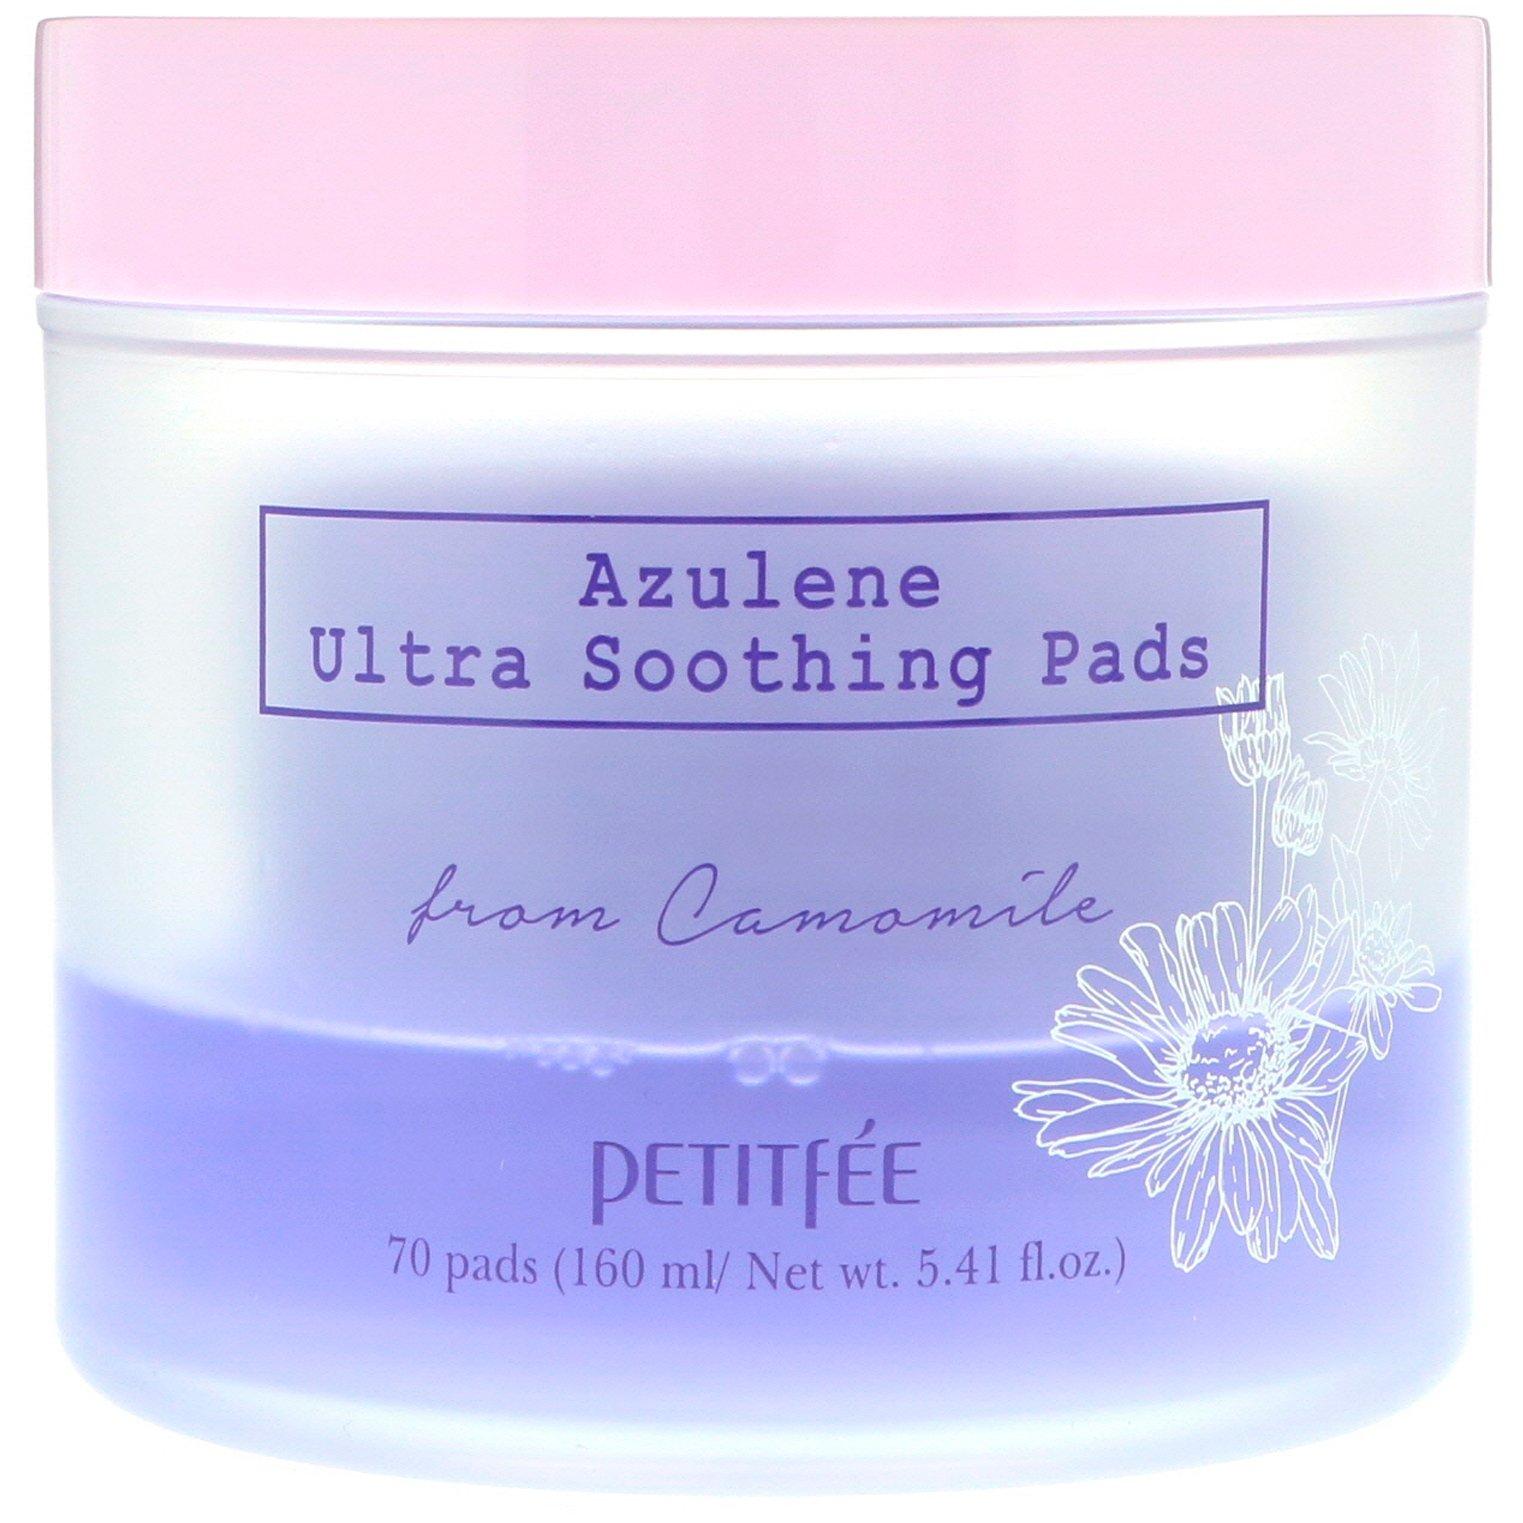 Azulene Ultra Soothing Pads